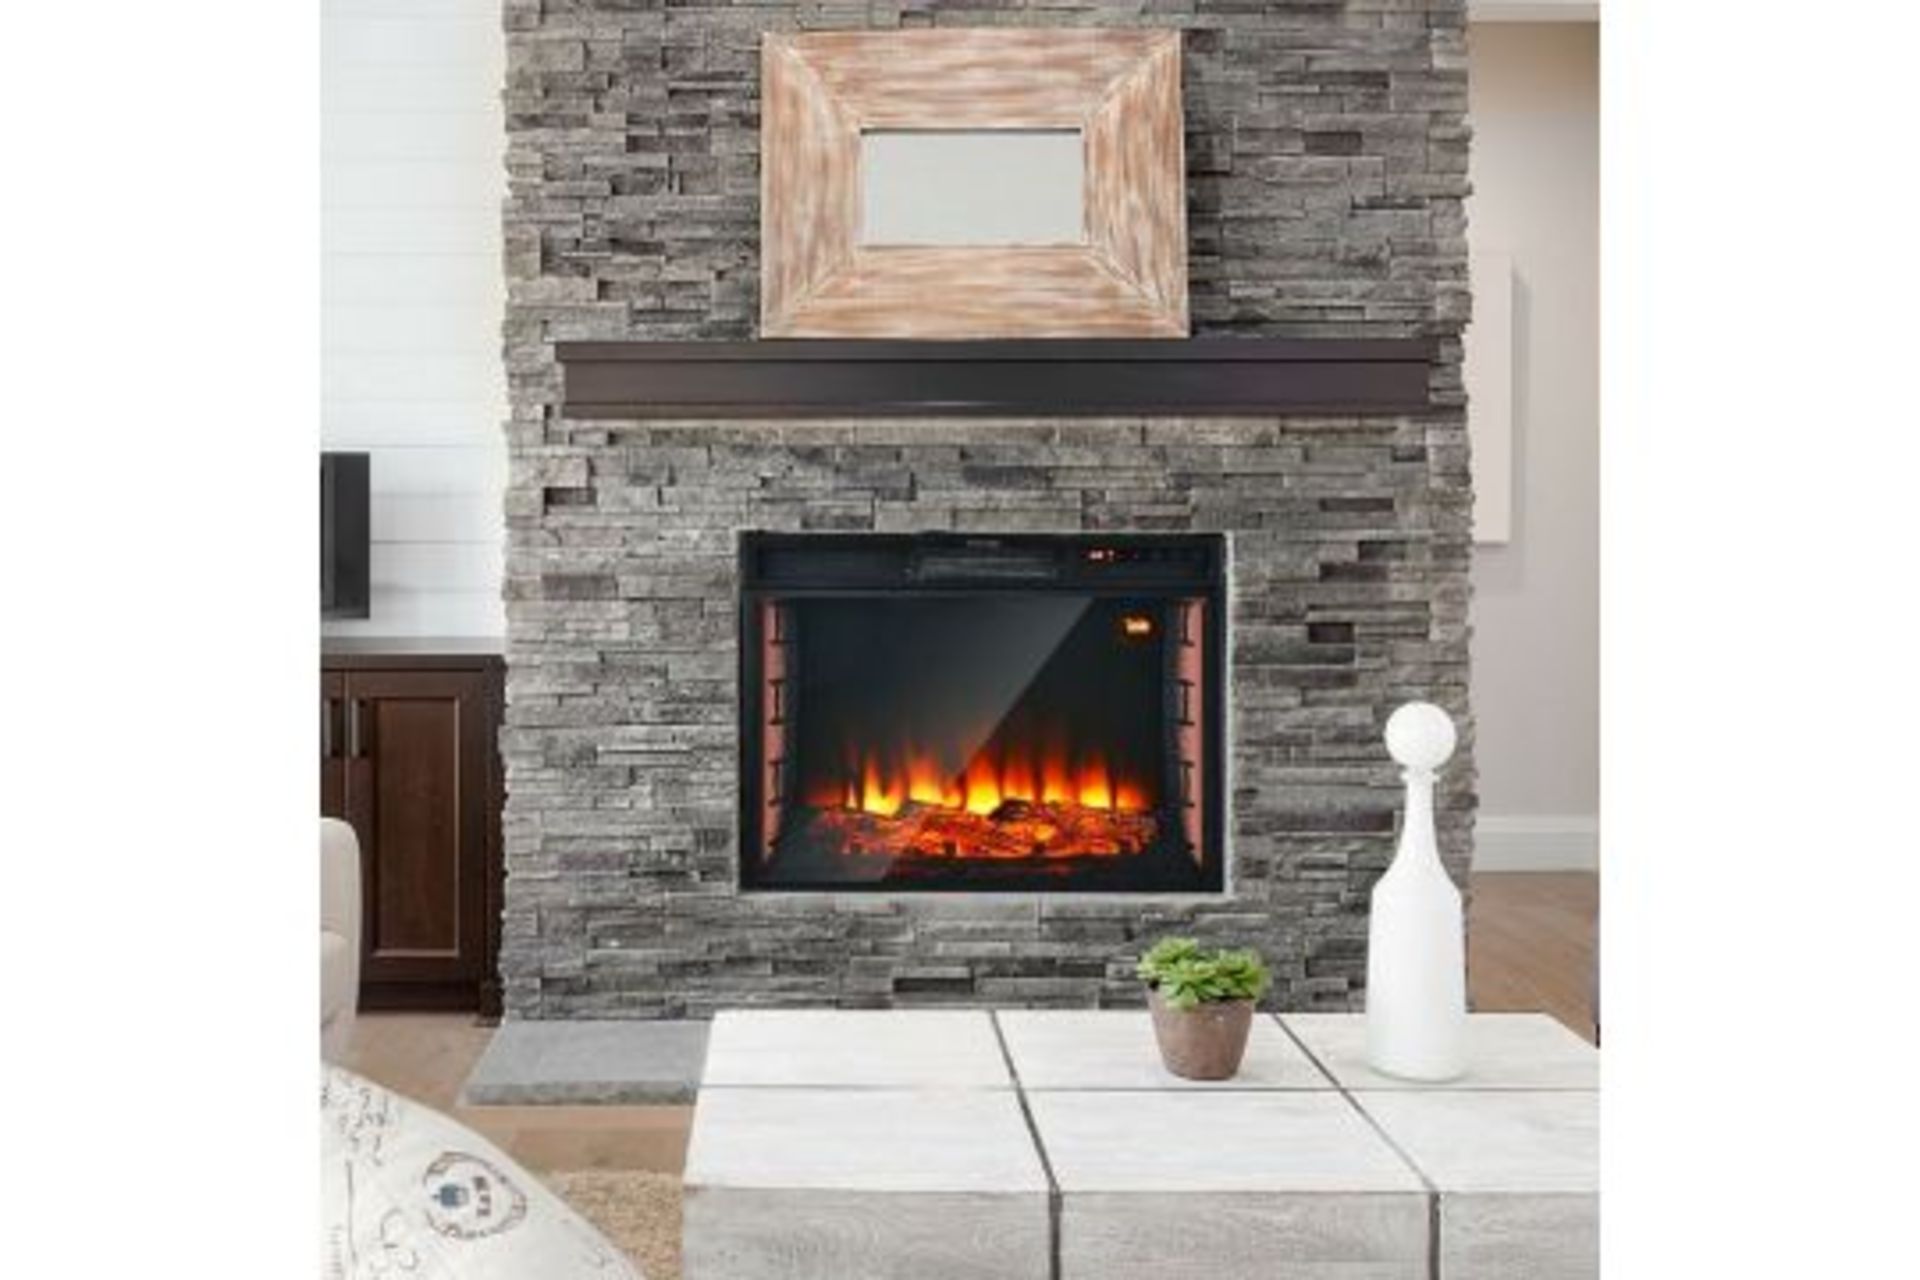 PALLET TO CONTAIN 16 x New & Boxed Marsily Marlow Home Co. 60cm Electric Fireplace. RRP £299 each,